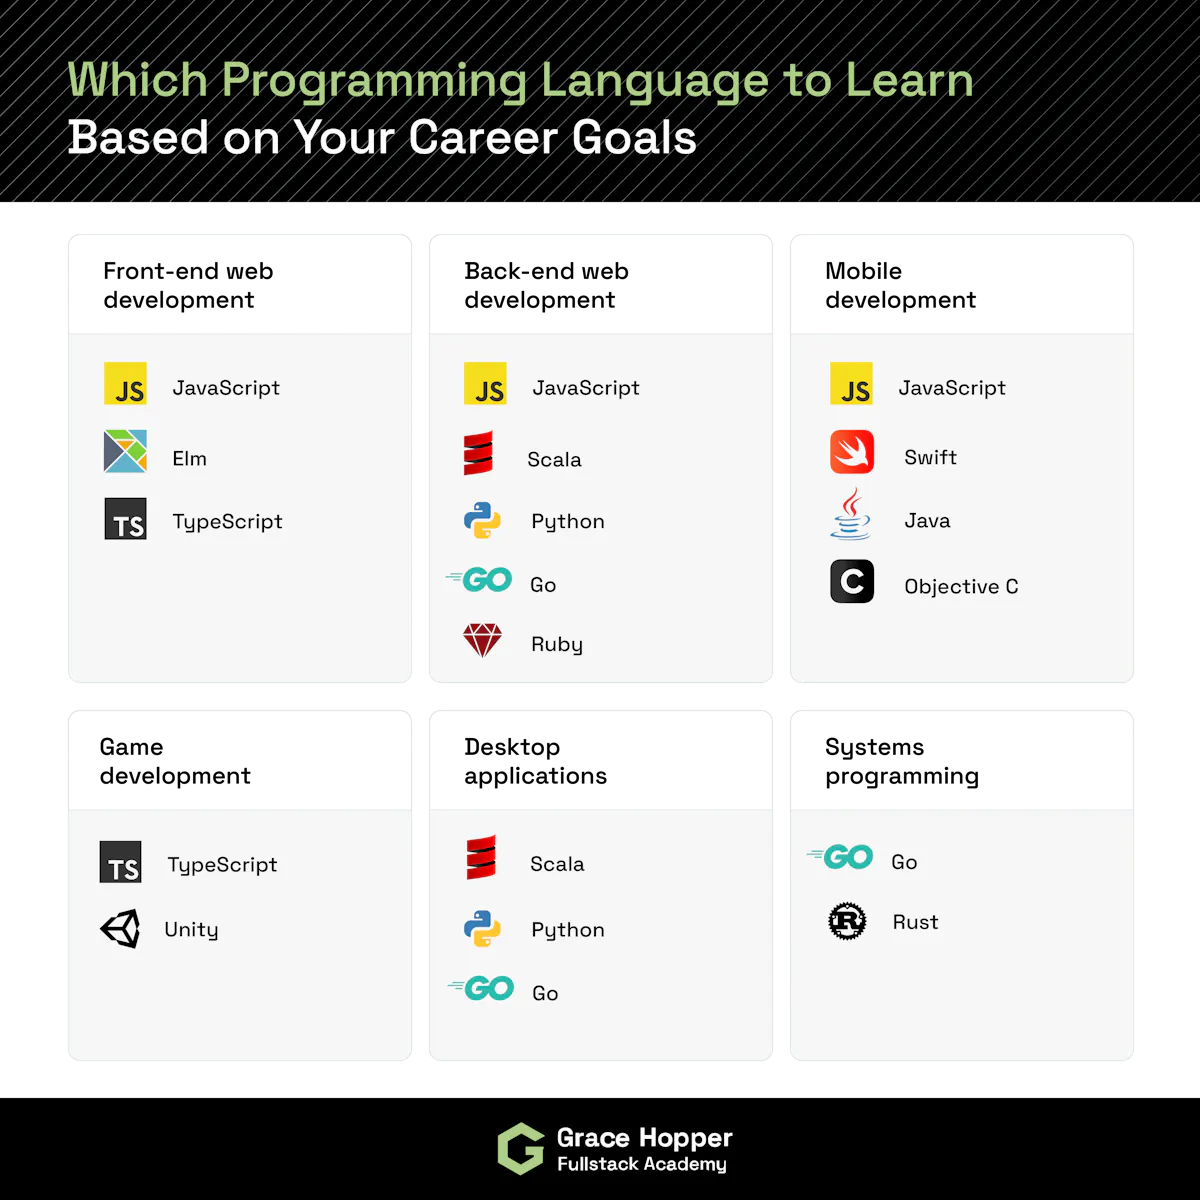 Which Program Language to Learn Based on Your Career Goals